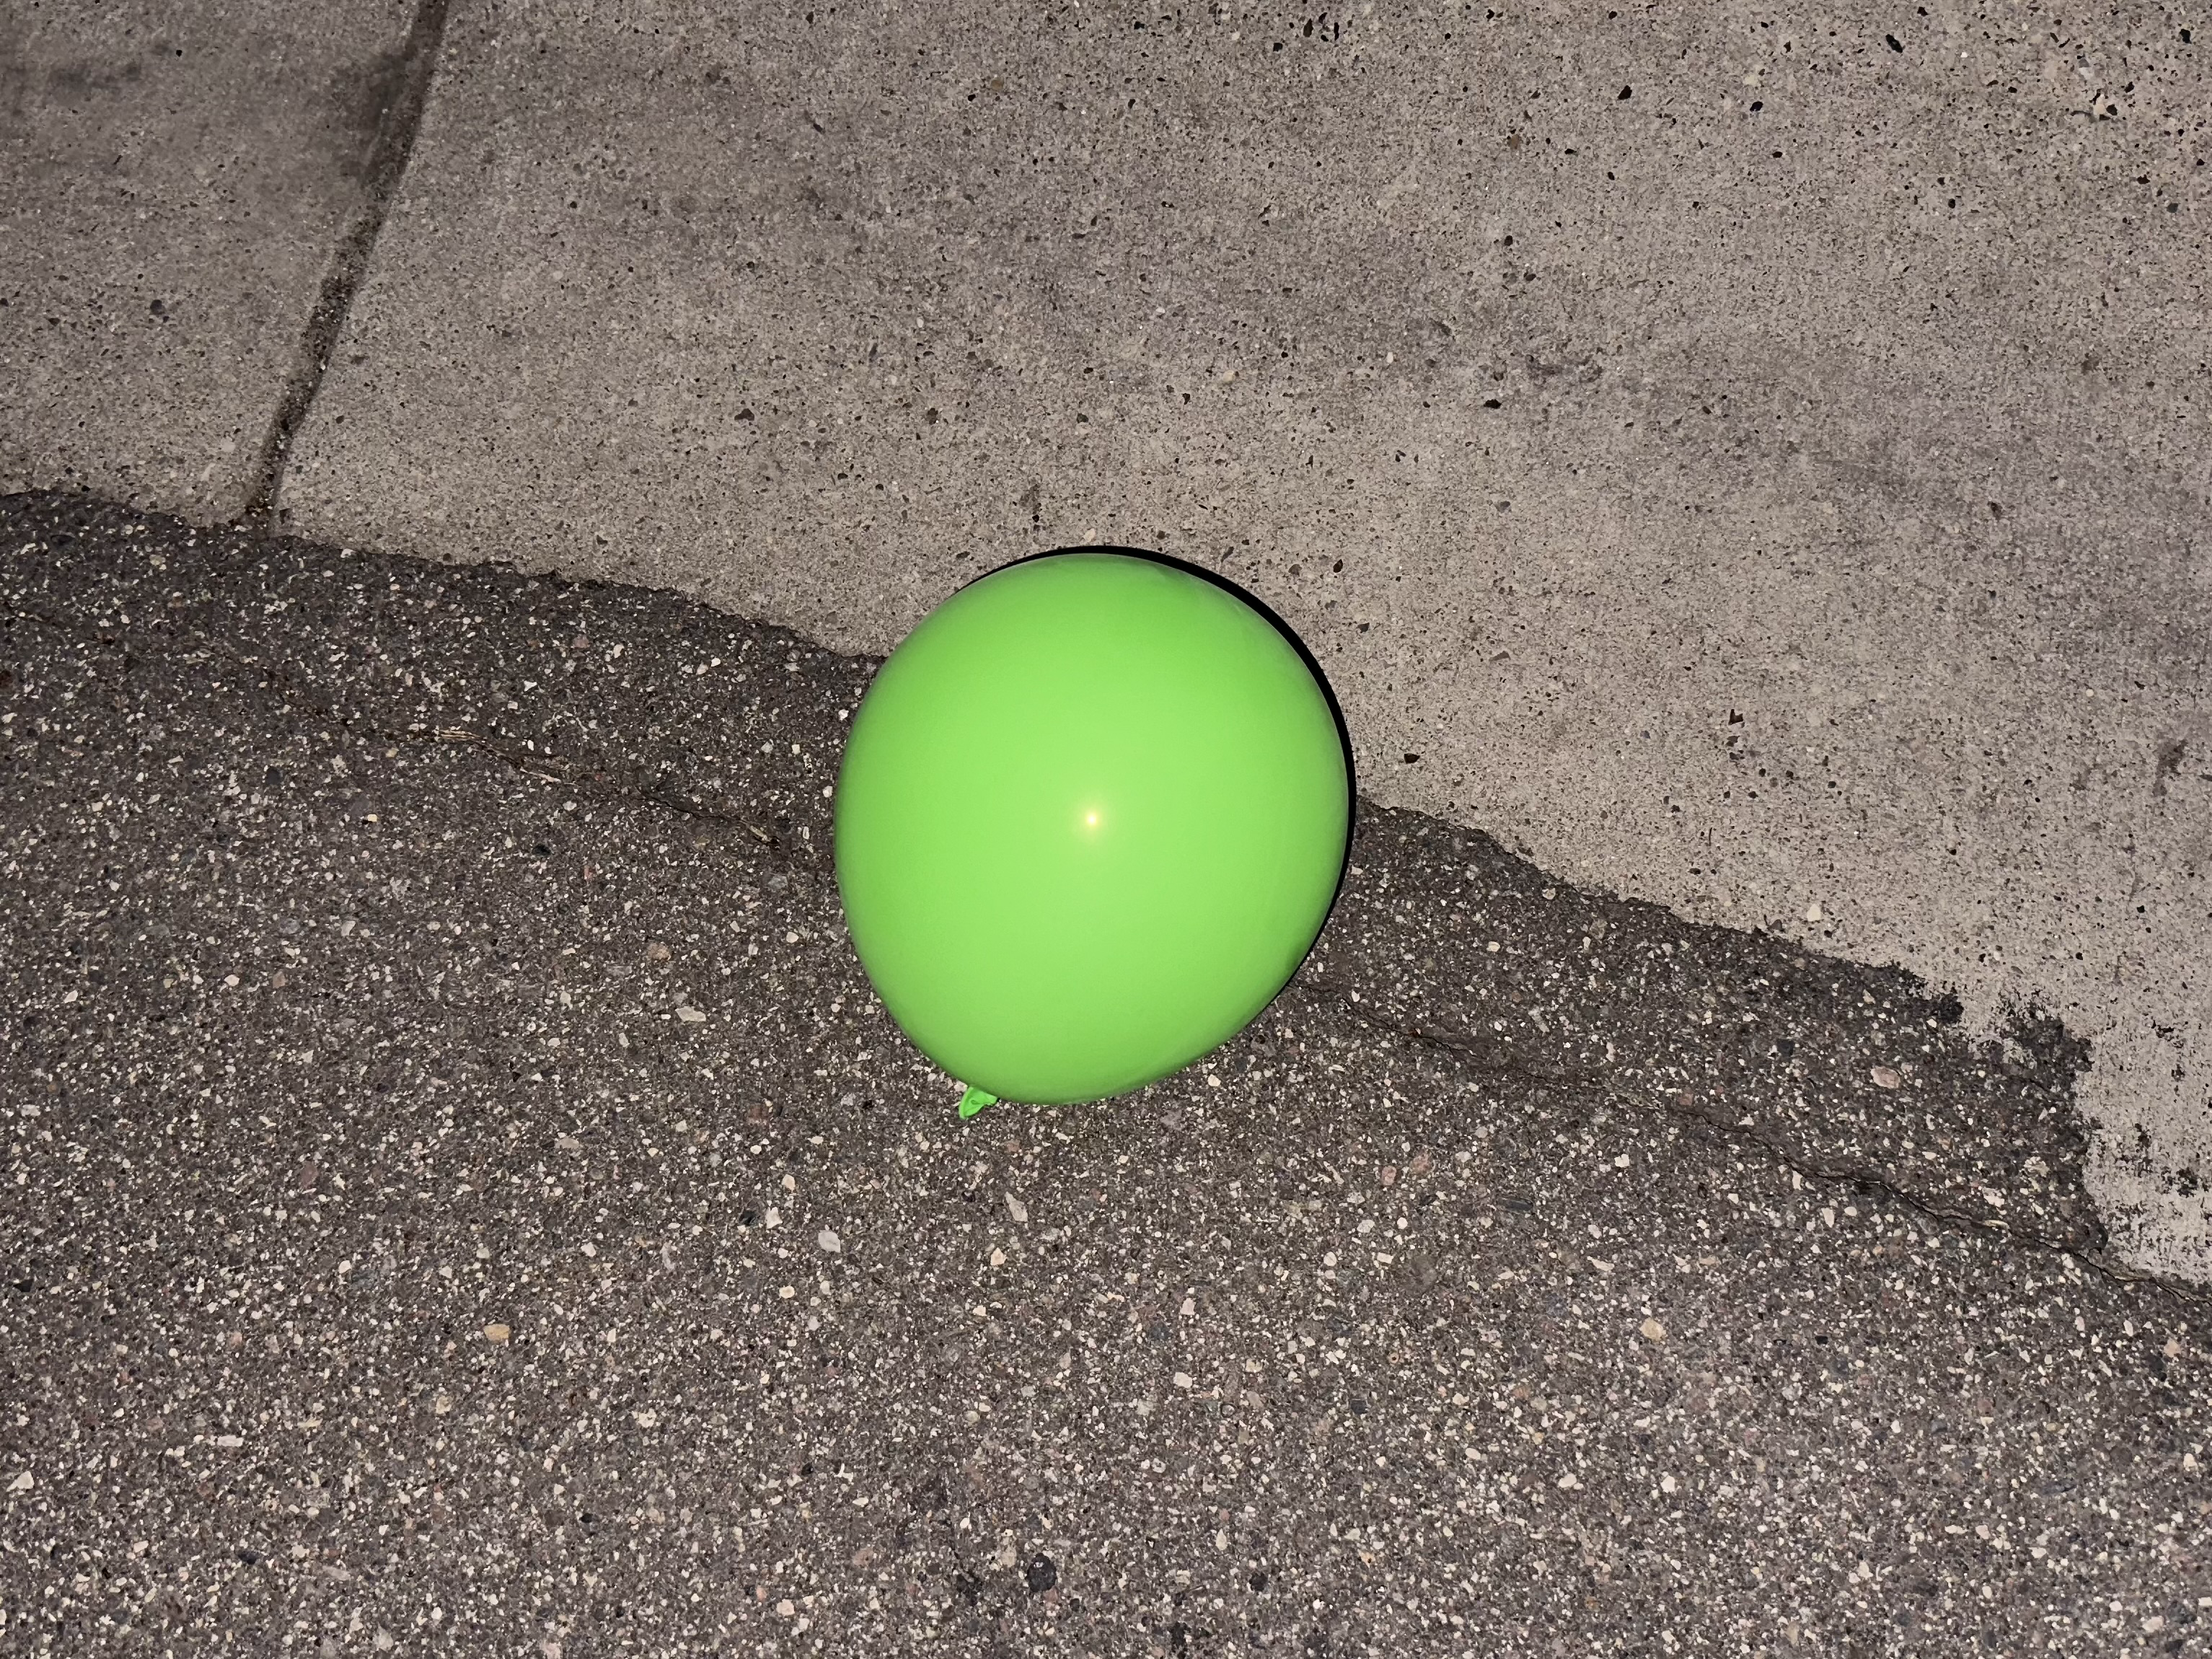 A green balloon rests on asphalt near a concrete curb under ambient light at night.